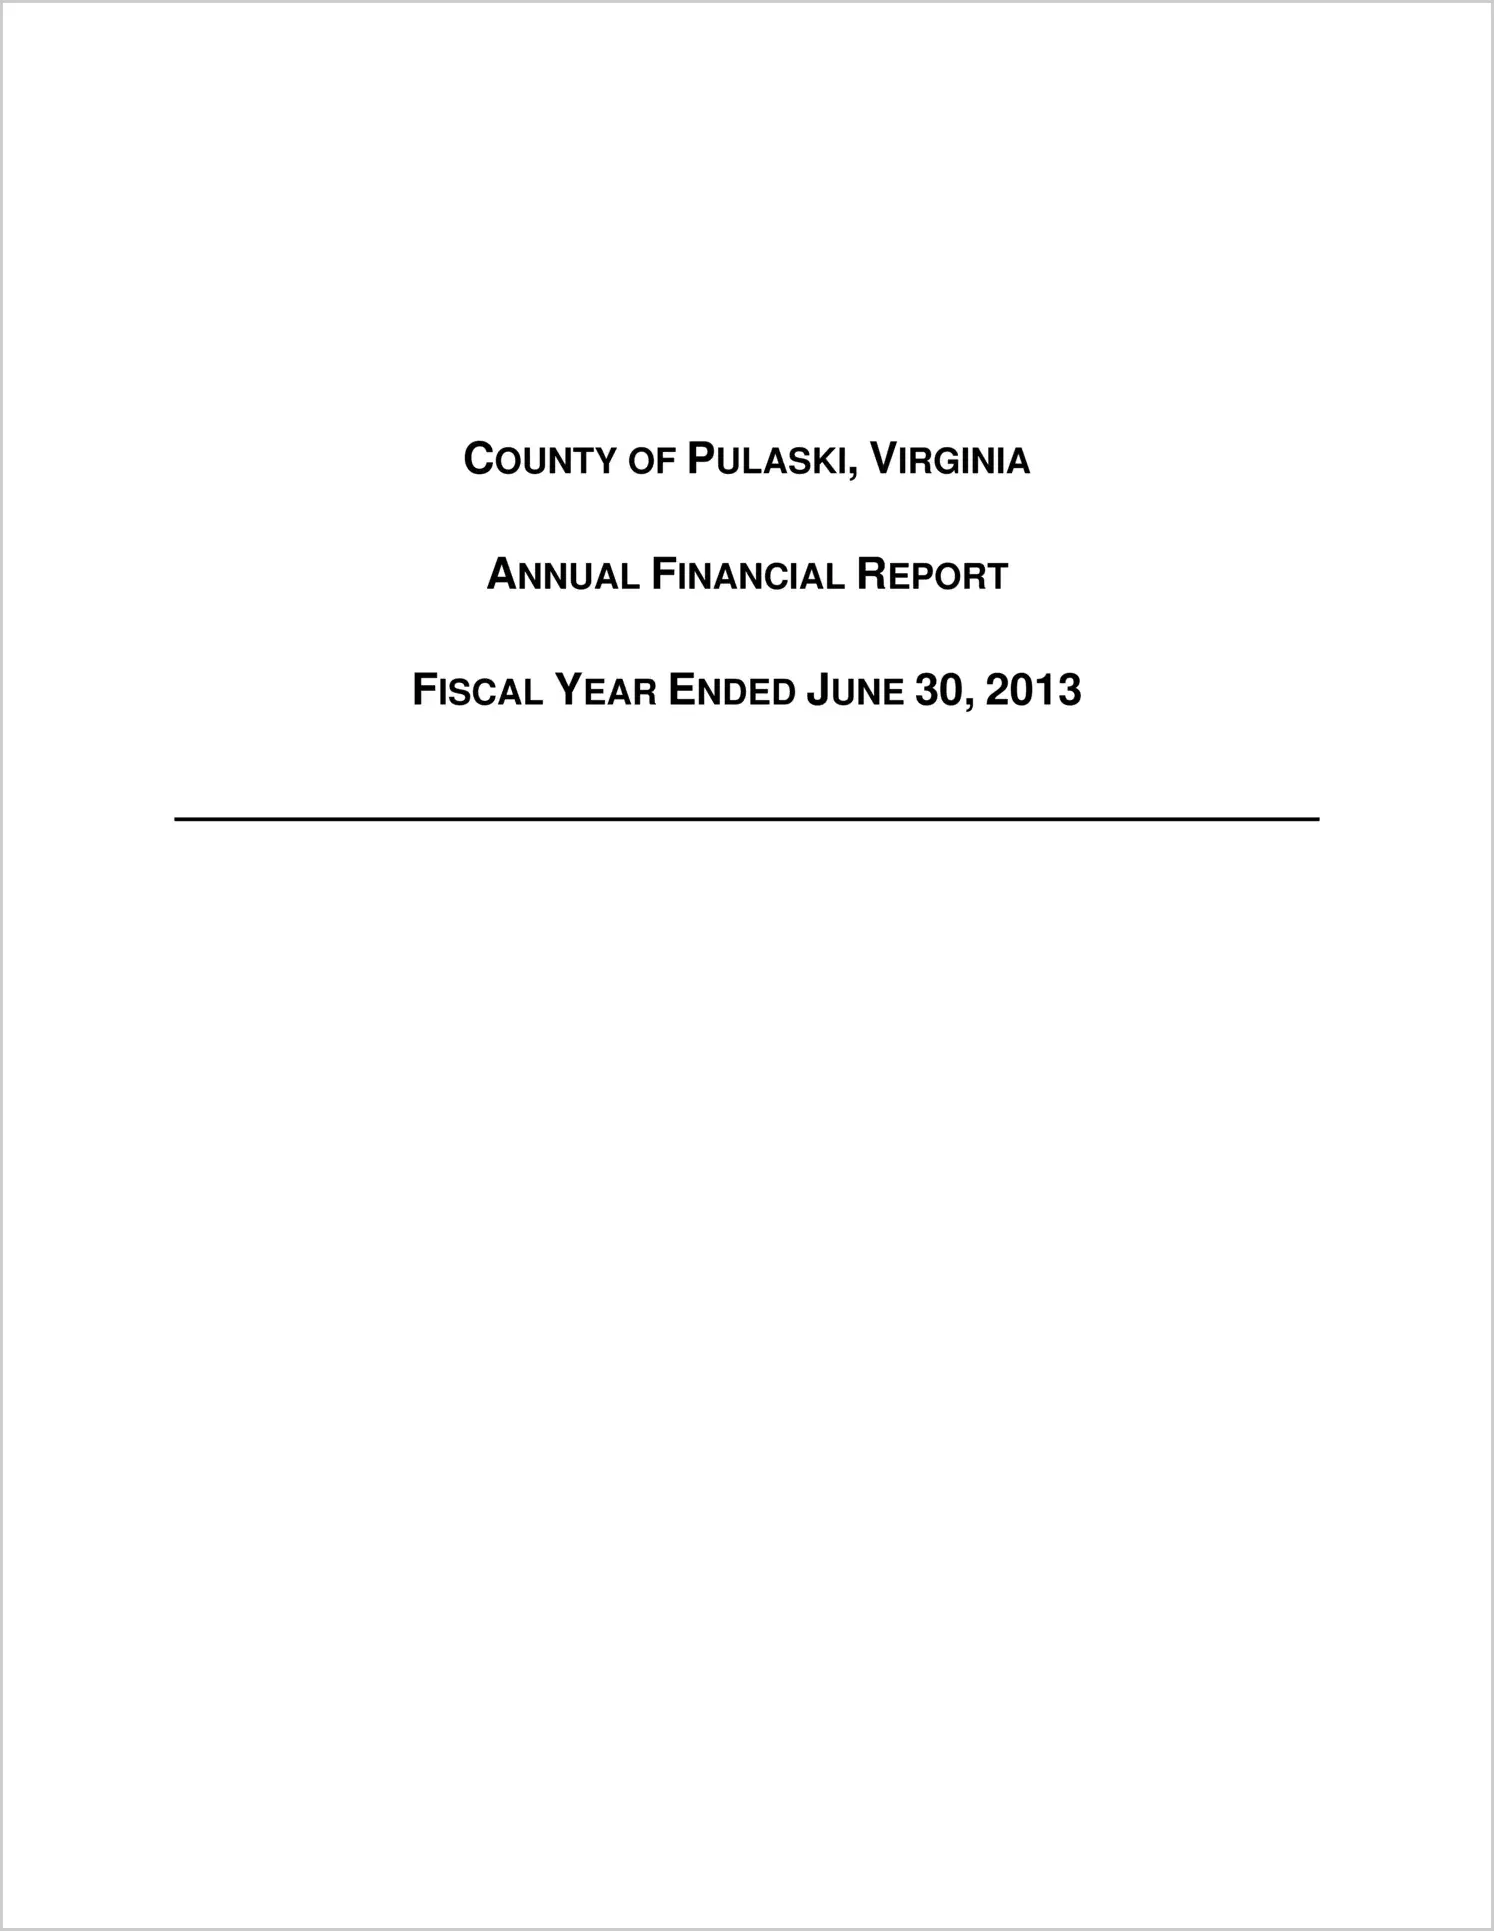 2013 Annual Financial Report for County of Pulaski